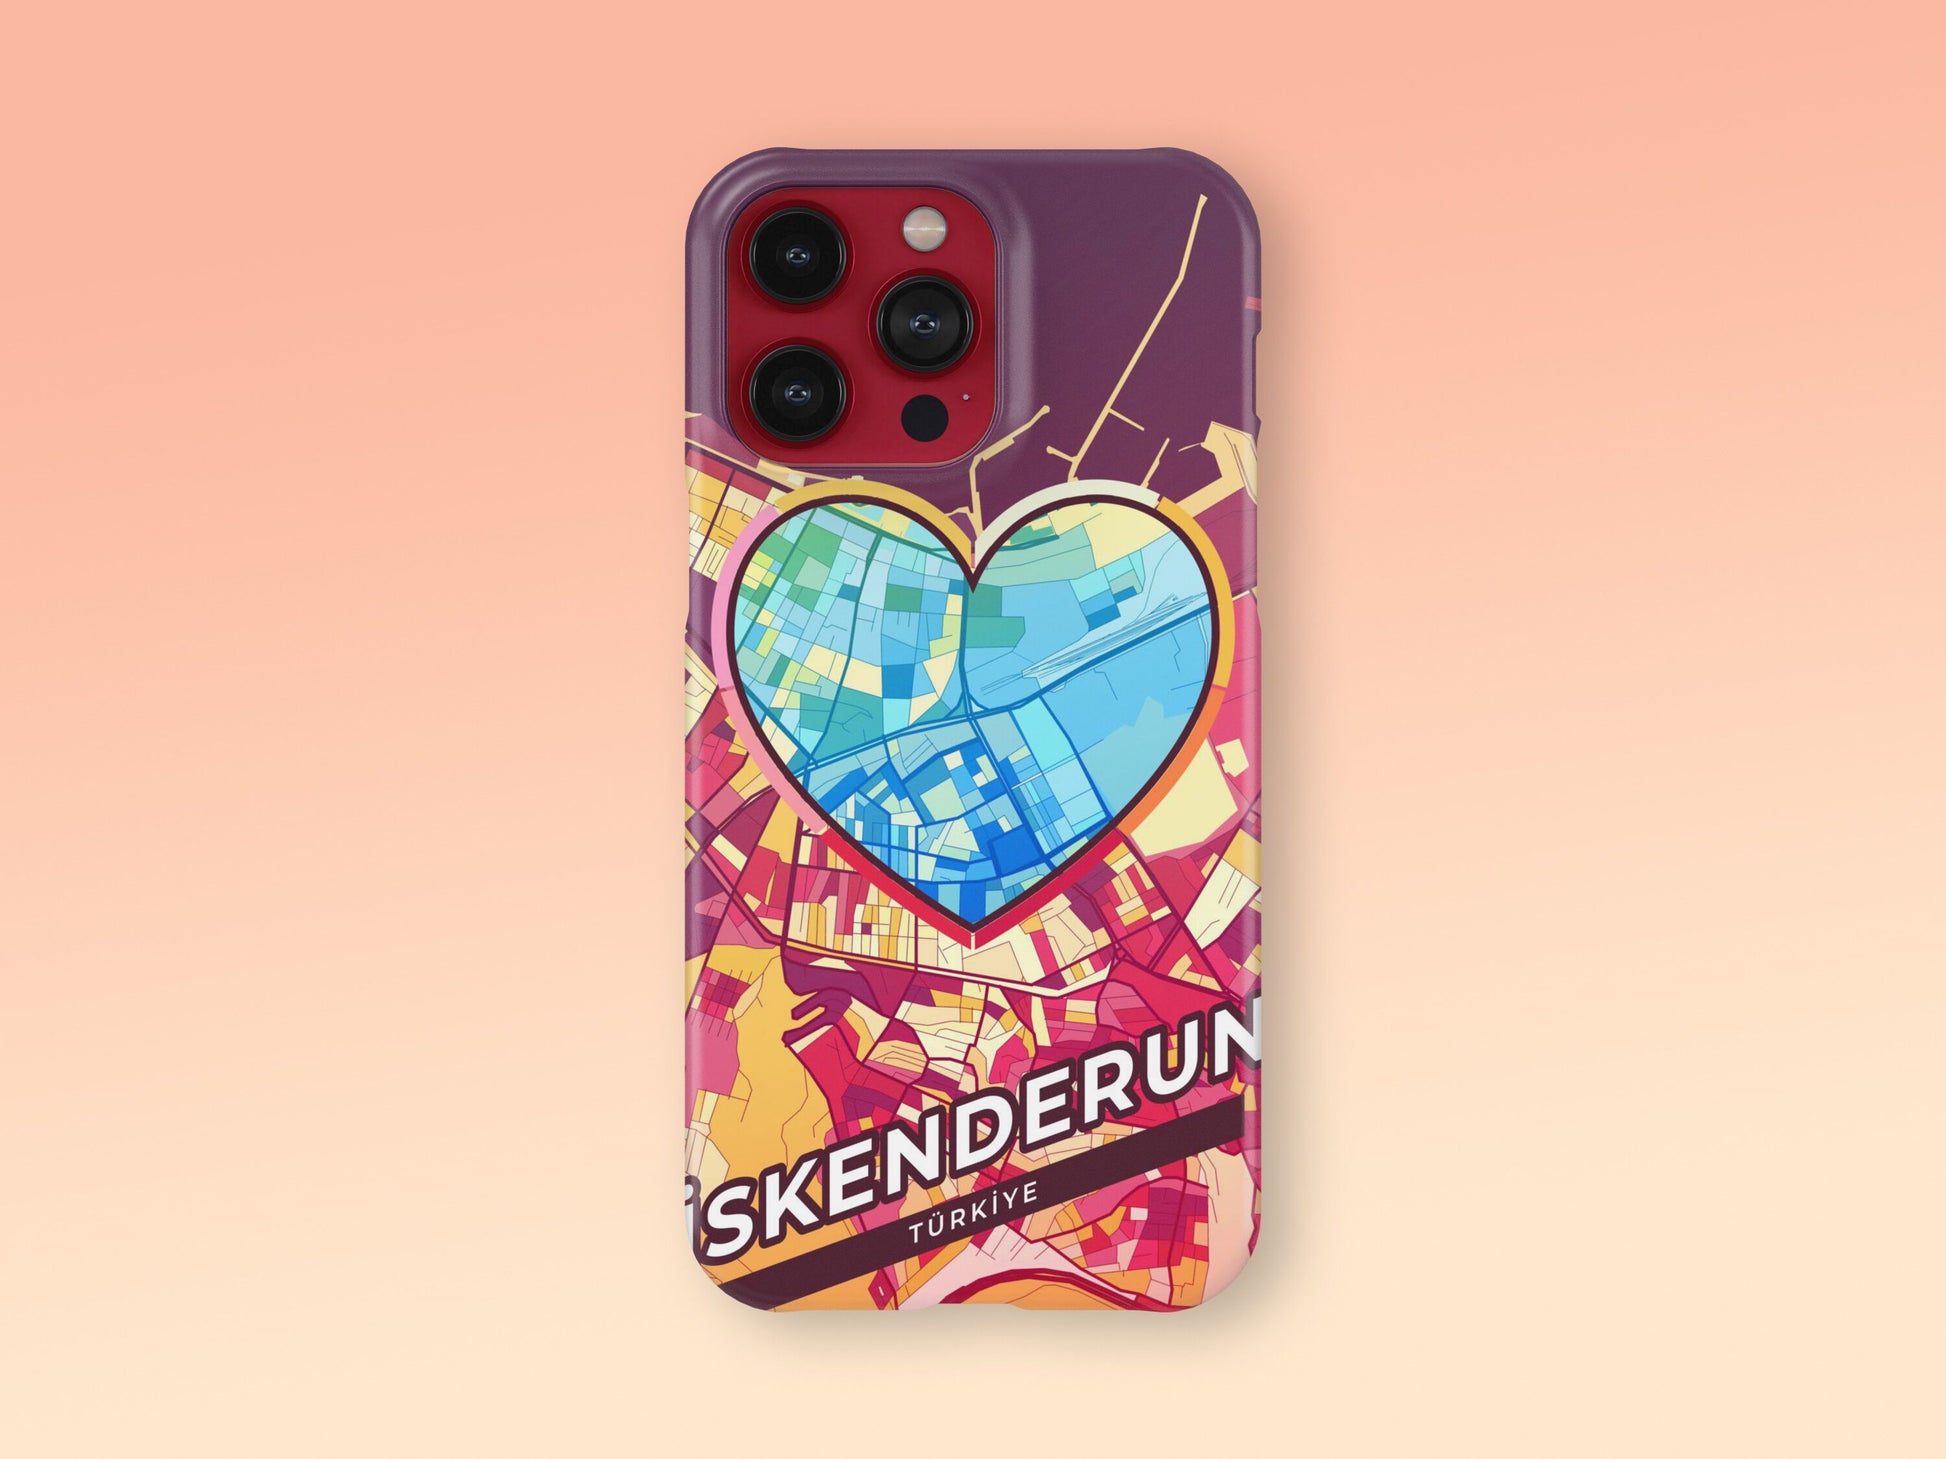 İskenderun Turkey slim phone case with colorful icon. Birthday, wedding or housewarming gift. Couple match cases. 2